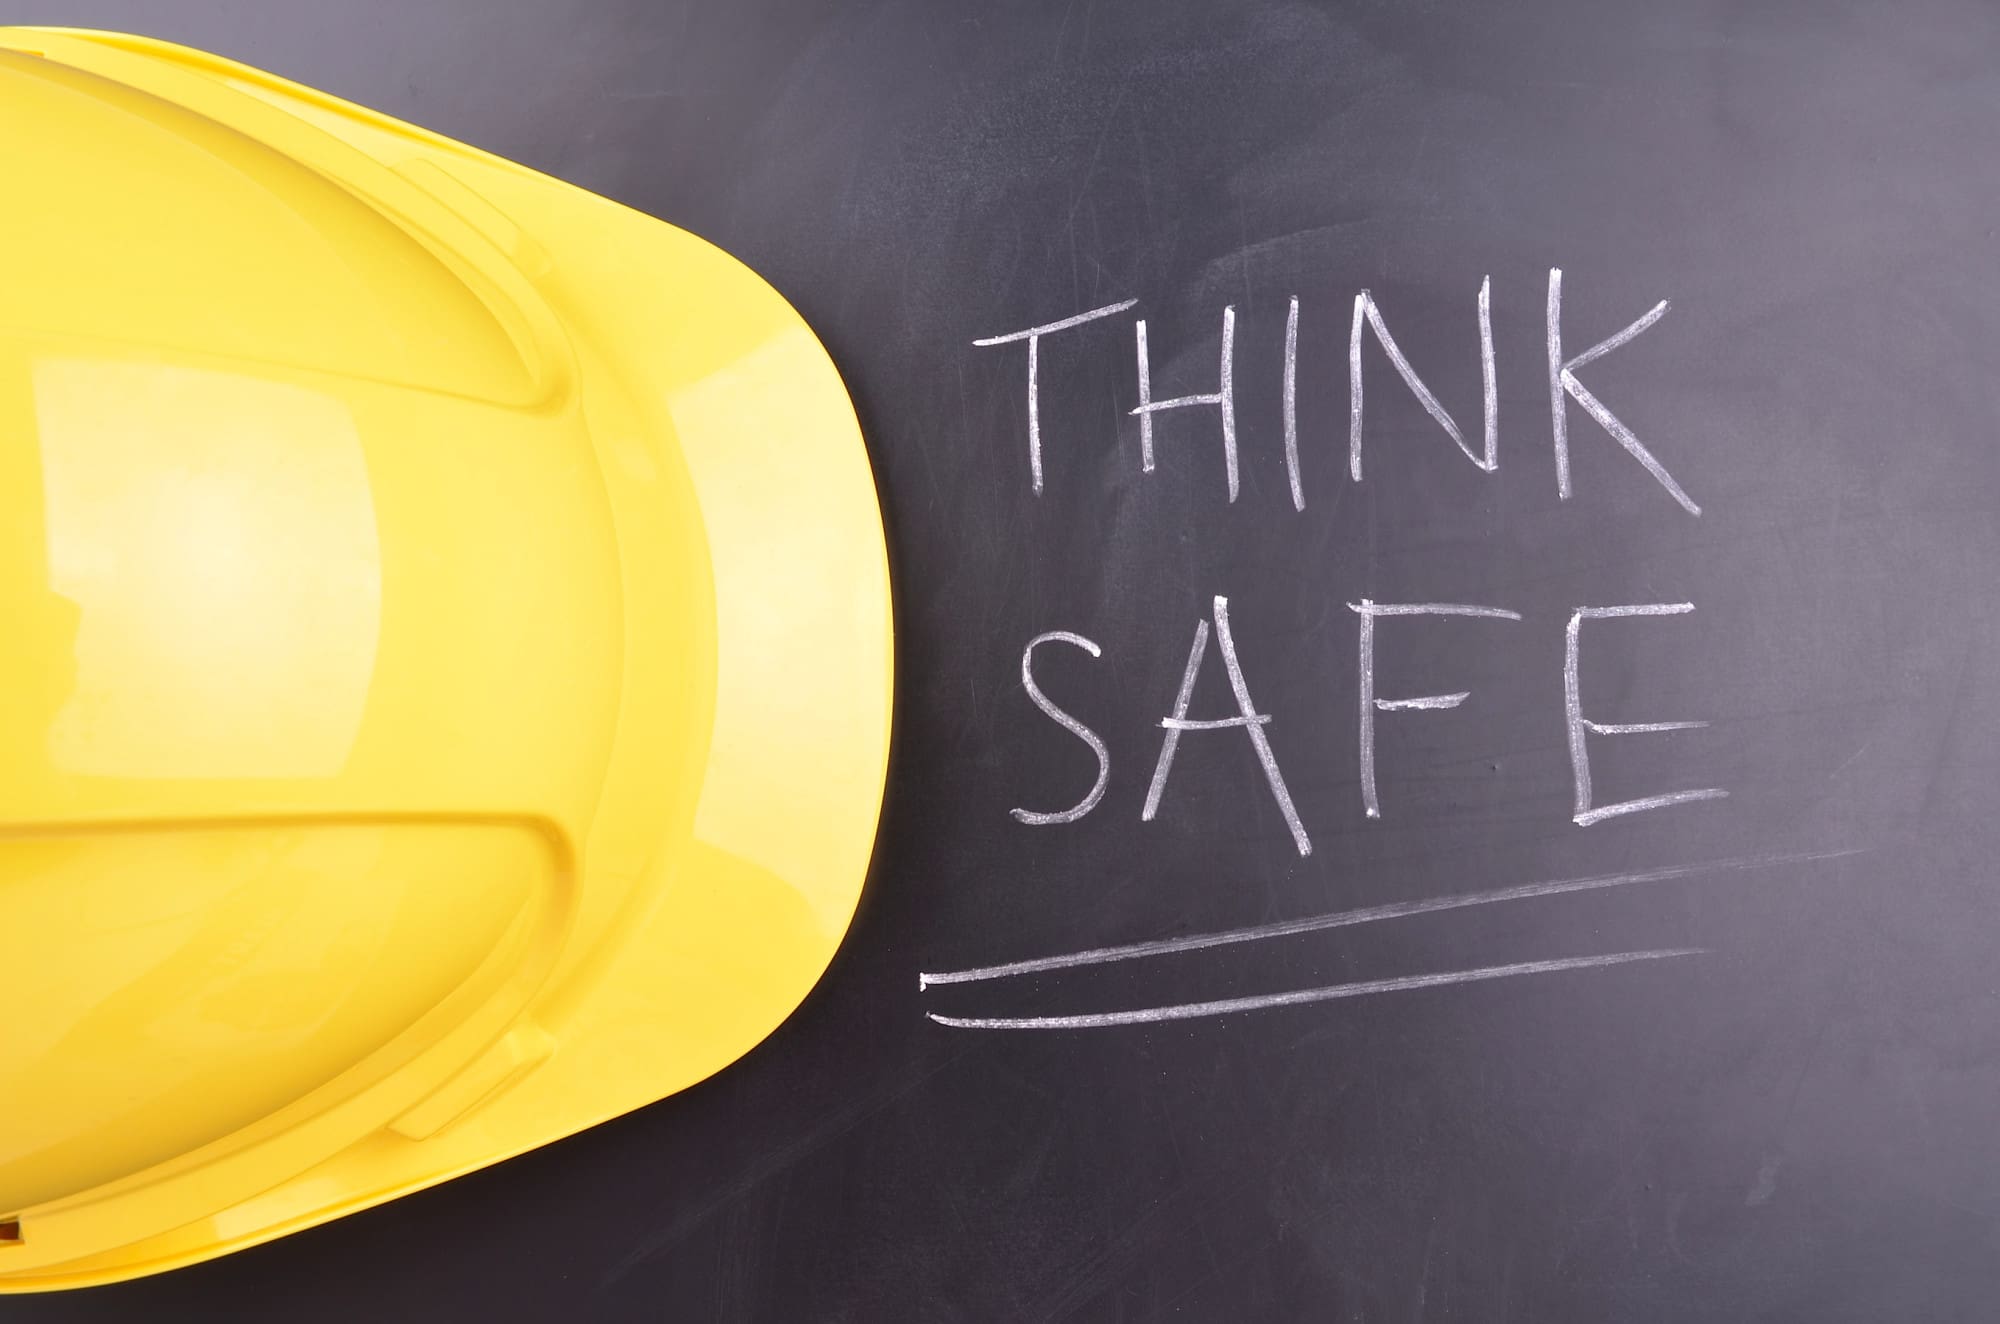 safety buy-in image of a yellow hardhat on a chalkboard that says "think safe"